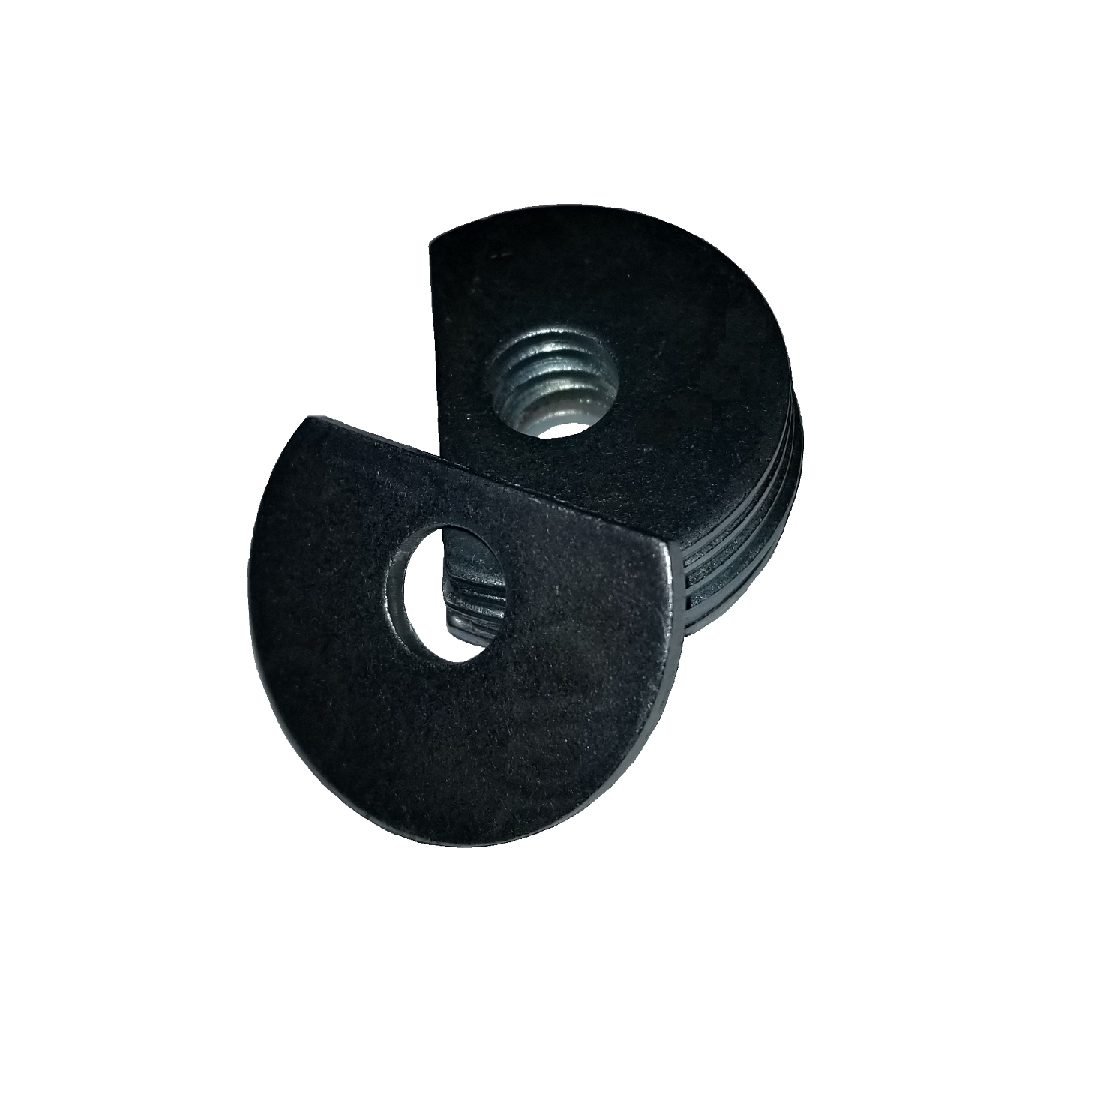 Clipped OD Washer - 0.641 ID, 1.500 OD, 0.250 Thick, Low Carbon Steel - Soft